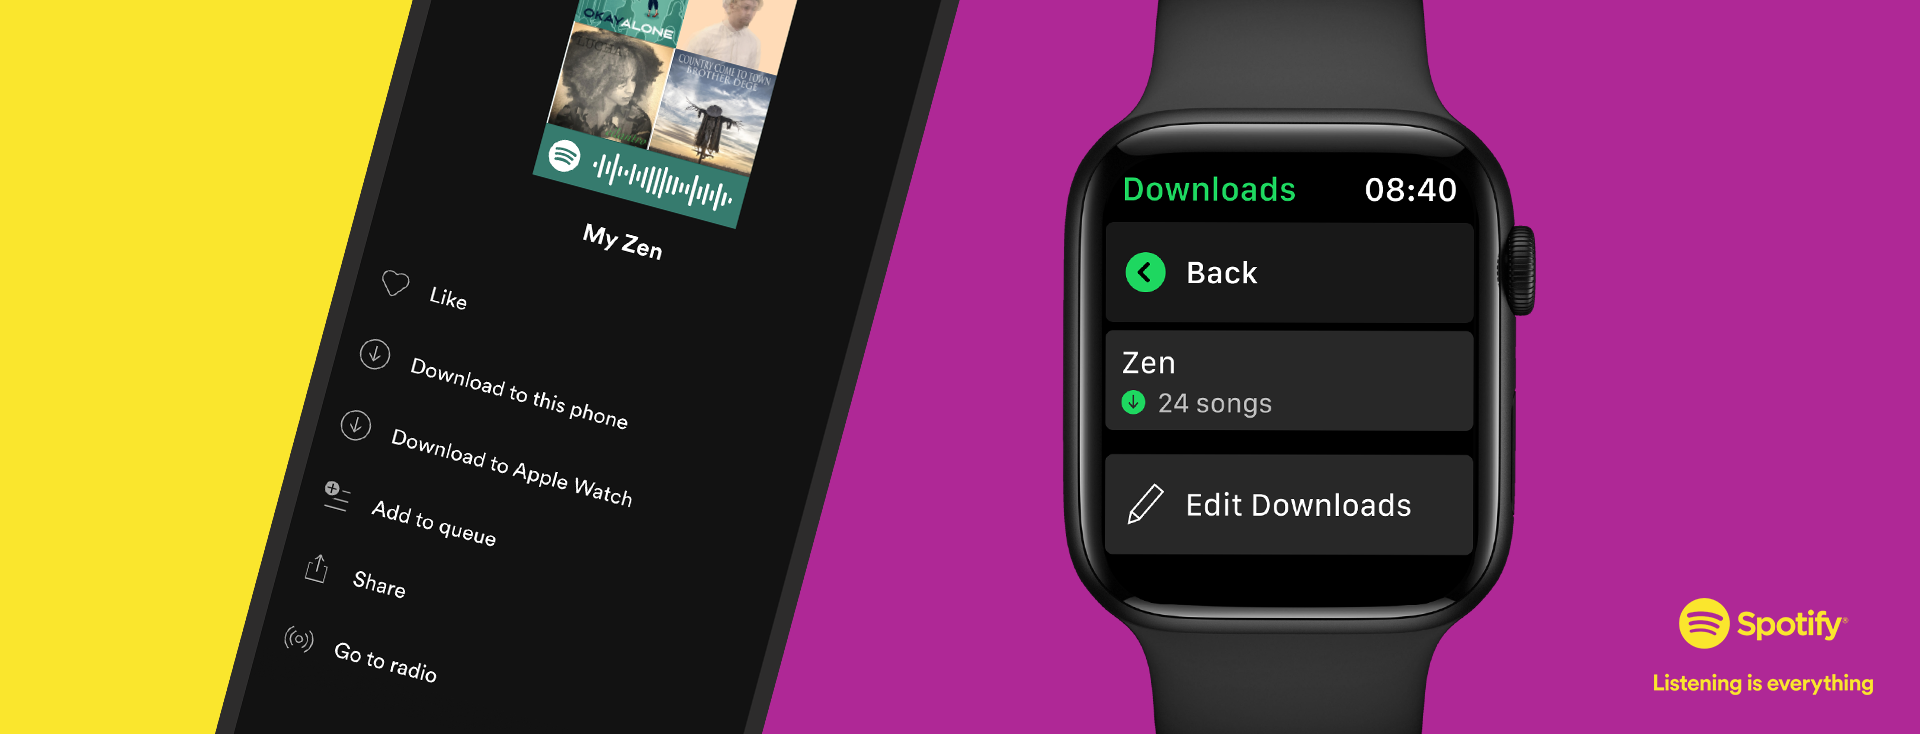 How to use Spotify on Apple Watch